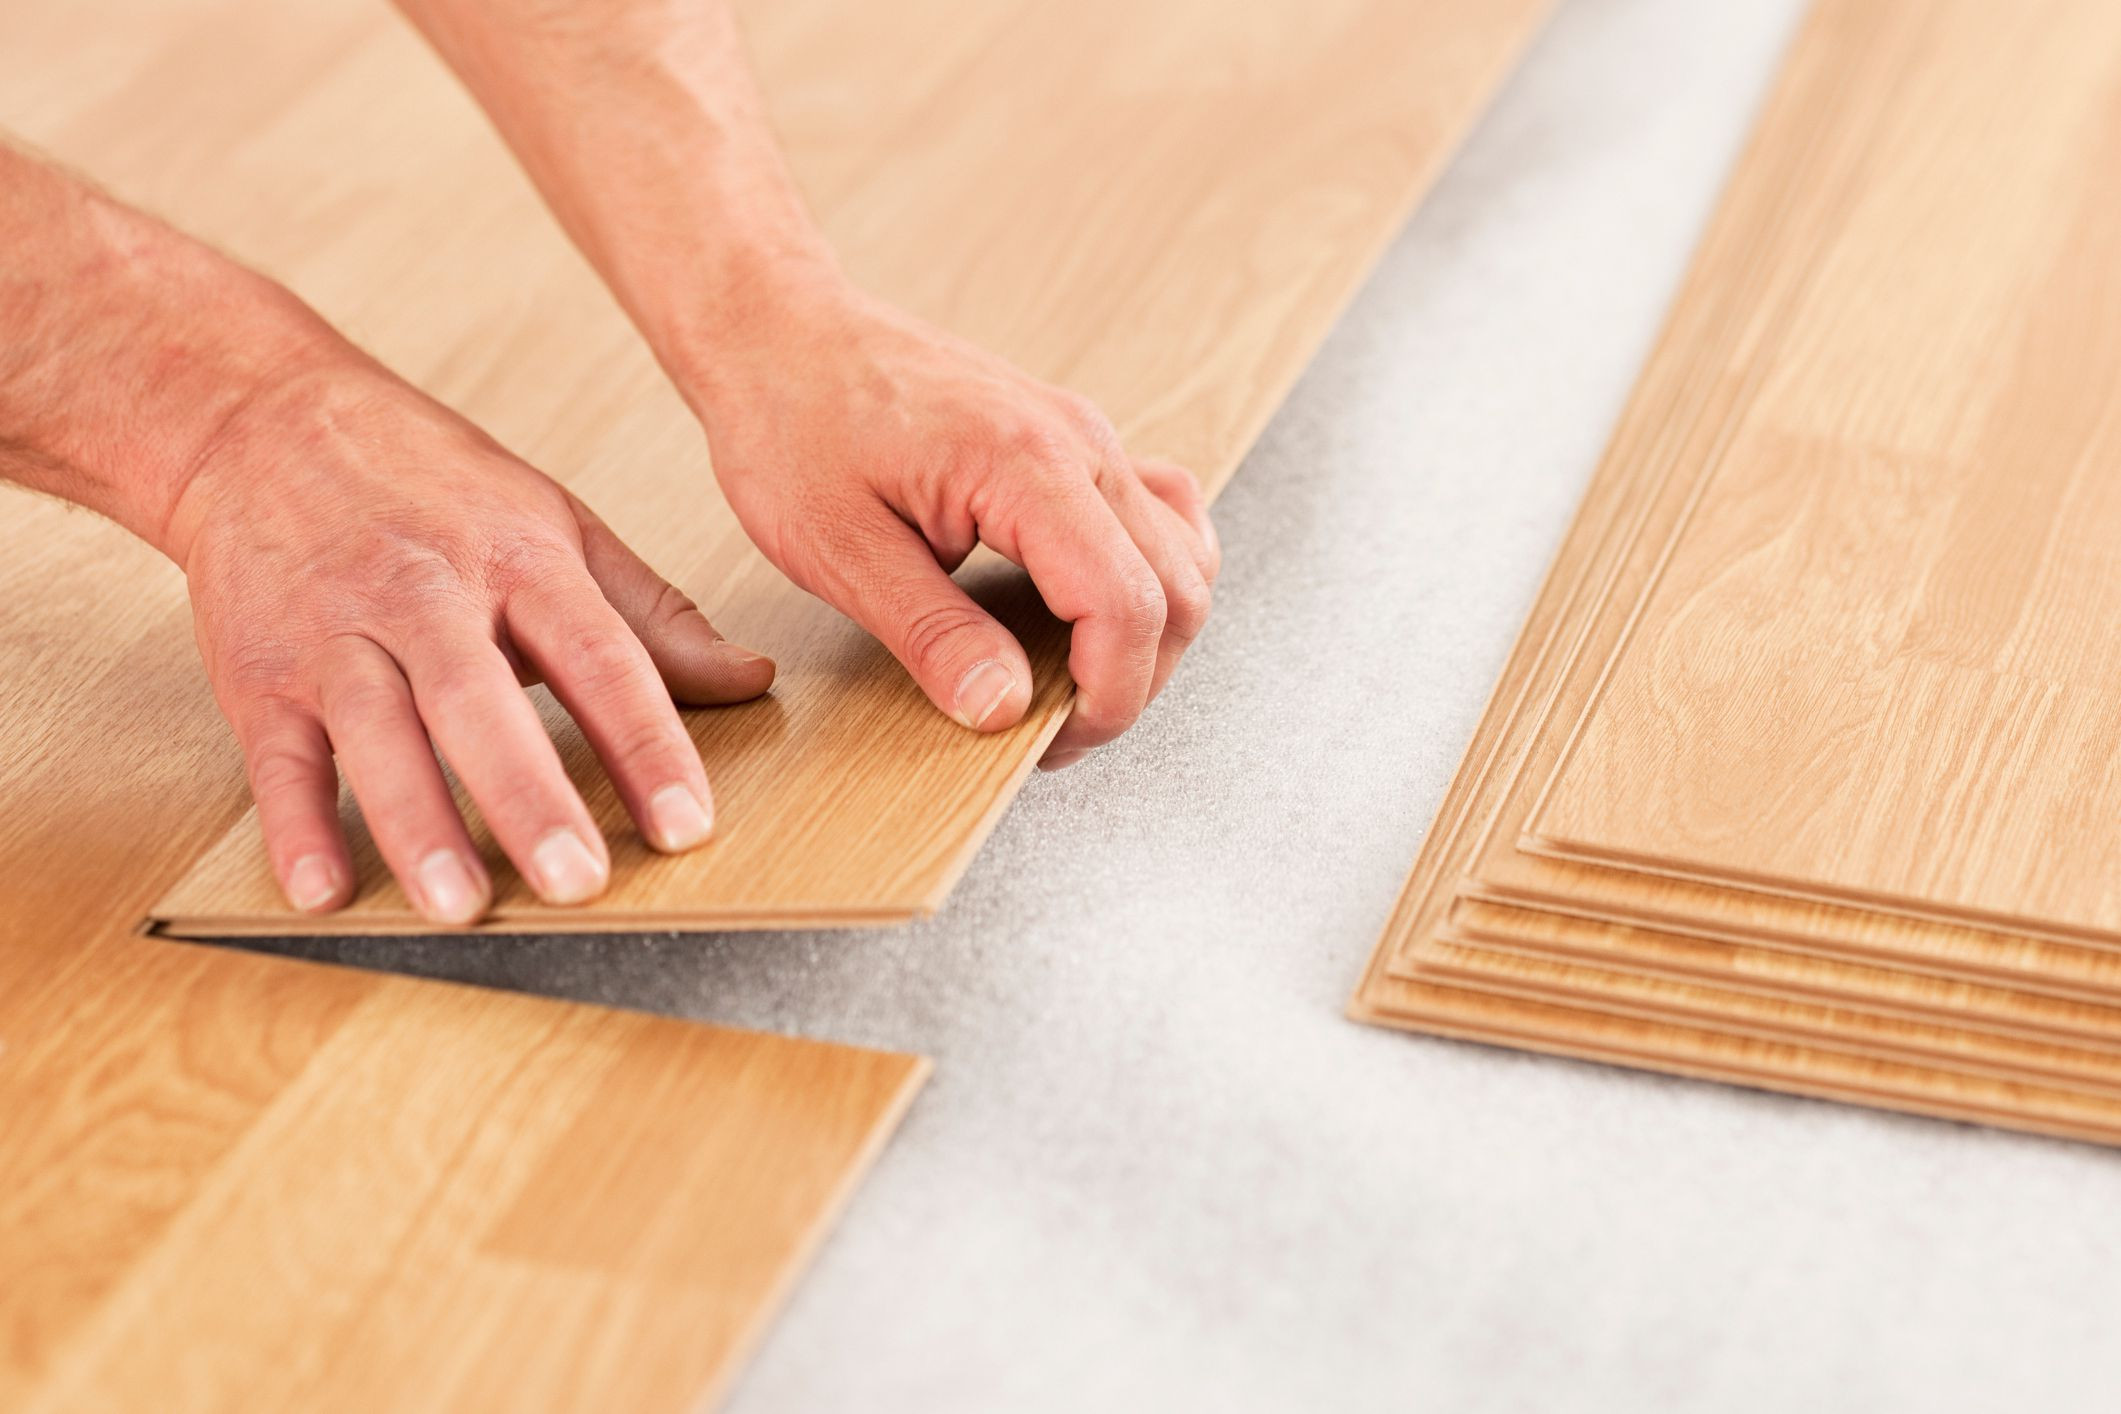 30 Lovely How to Fix Gaps In Hardwood Floors 2024 free download how to fix gaps in hardwood floors of laminate underlayment pros and cons inside laminate floor install gettyimages 154961561 588816495f9b58bdb3da1a02